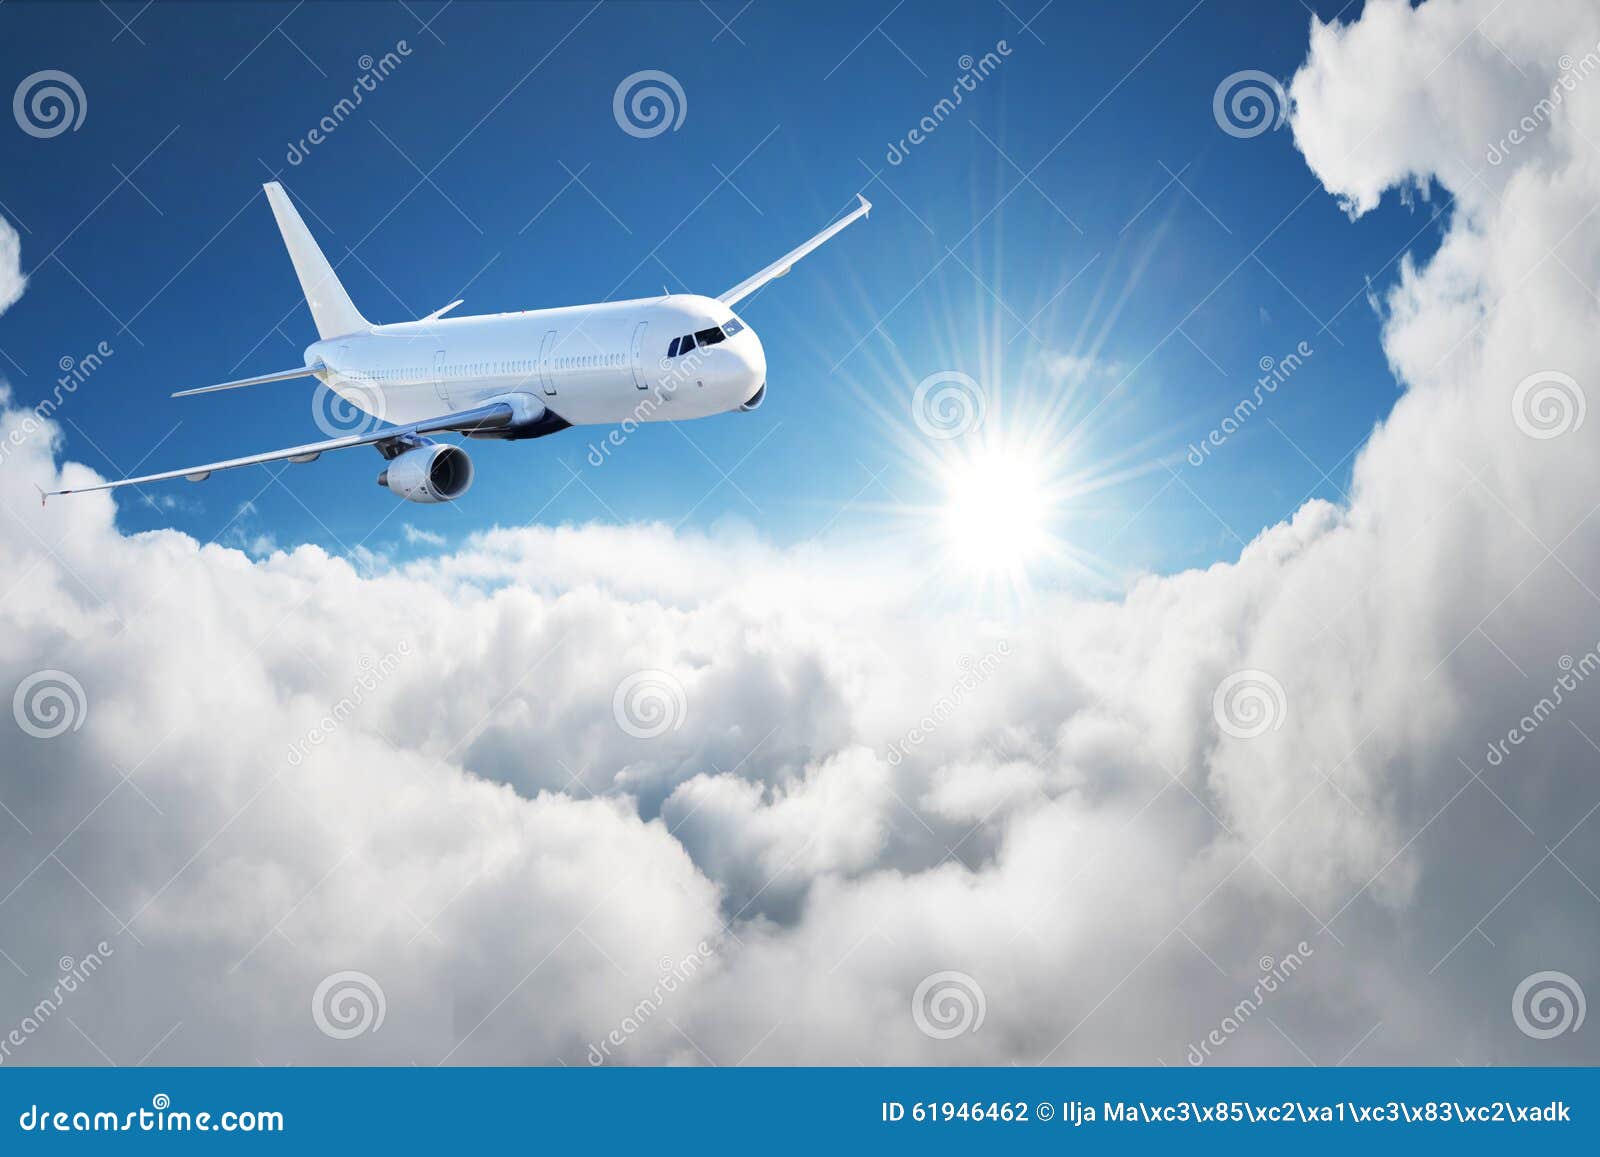 airplane in the sky - passenger airliner / aircraft